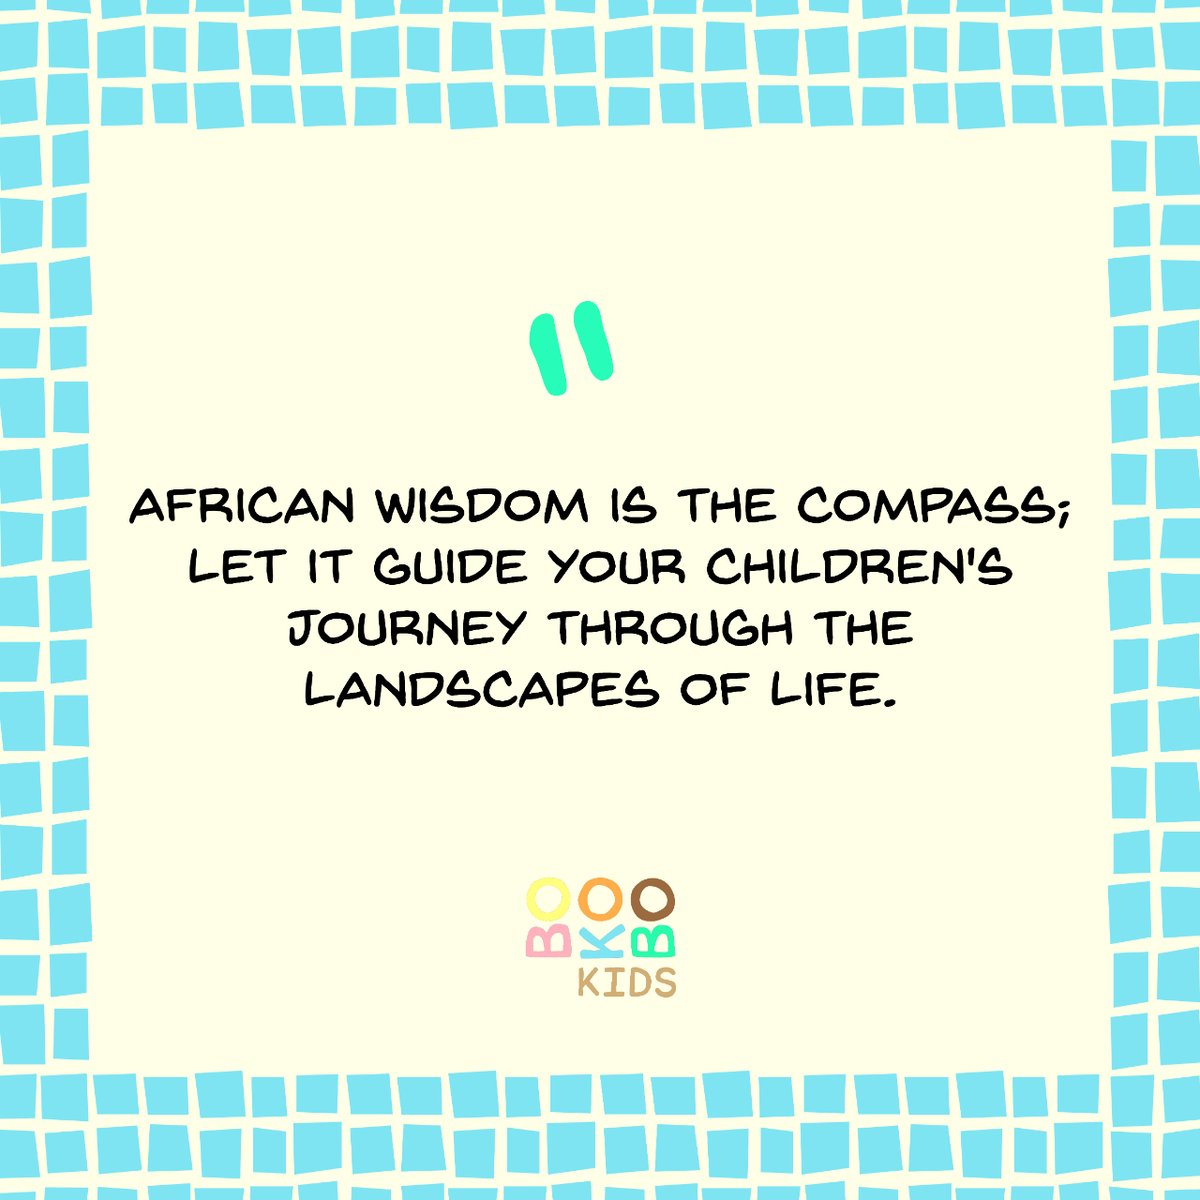 Let African Wisdom Guide Your Path

#bokobokids #africanwisdom #ancientwisdom #africanstory #diversity #africankids #blackkids #blackstory #education #education4all #educationforkids #mondaymotivation